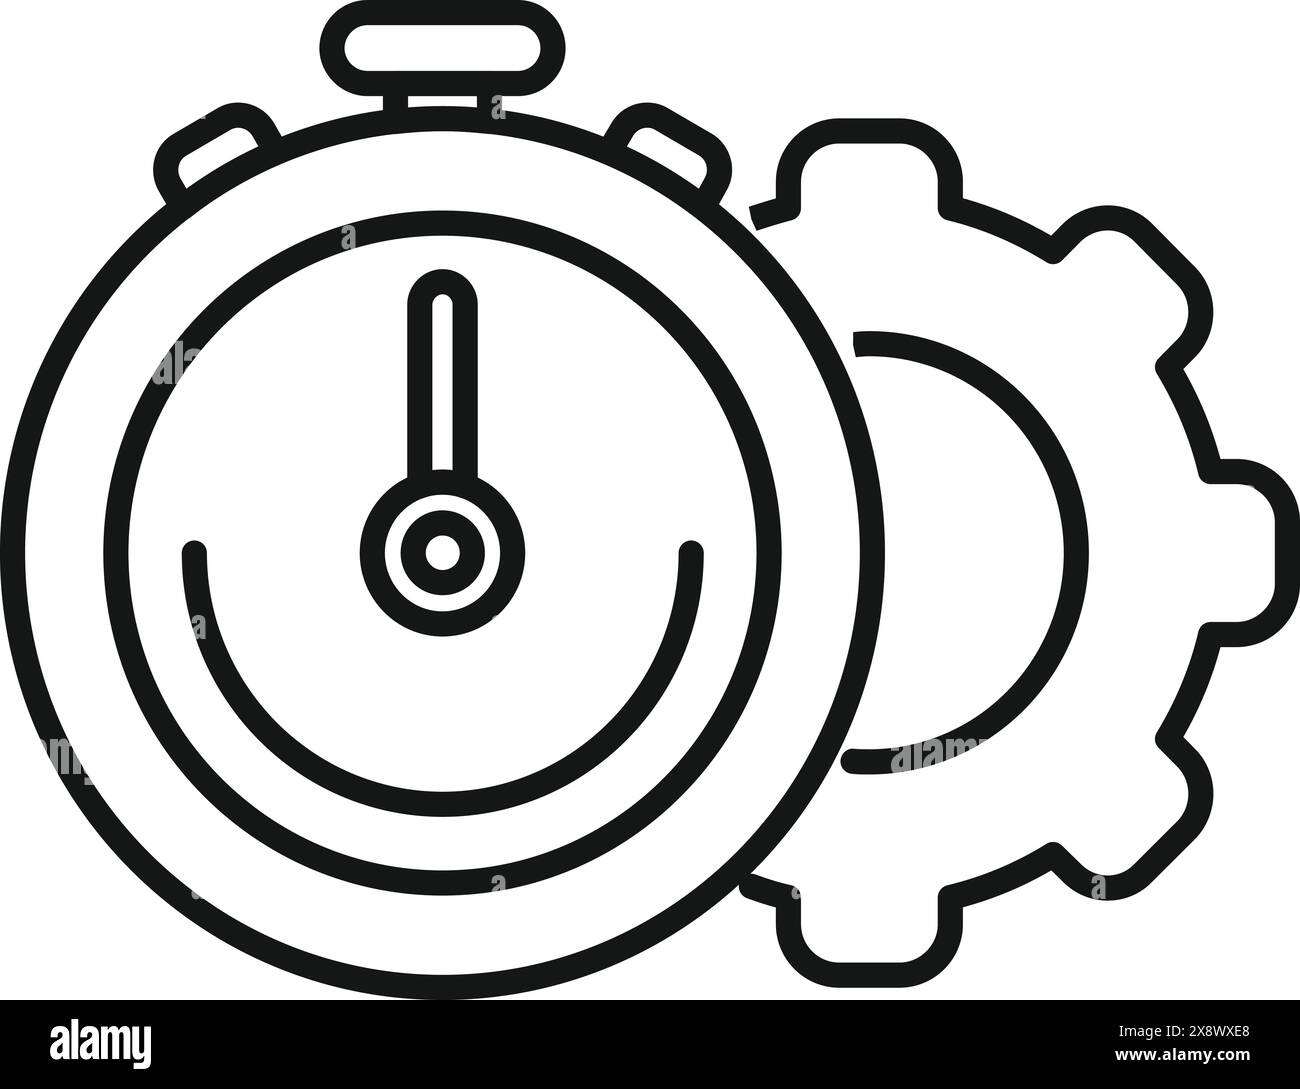 Black and white line art of a stopwatch intertwined with mechanical gears Stock Vector